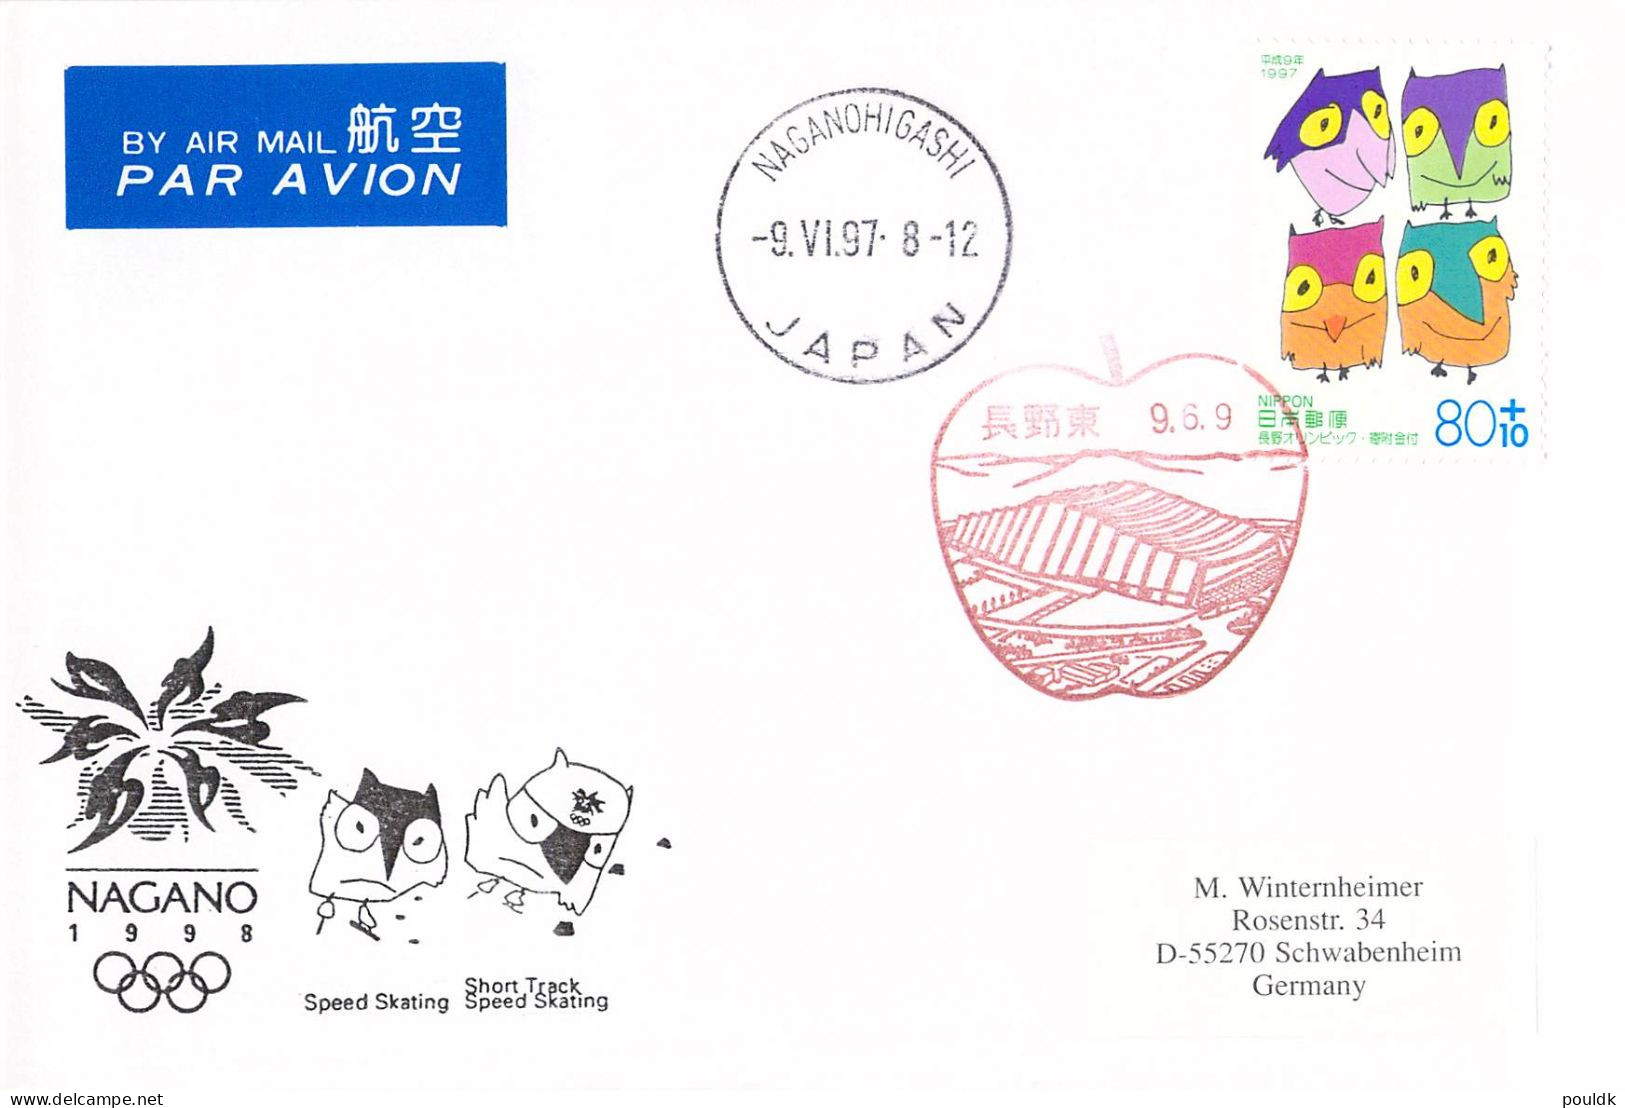 Olympic Games in Nagano 1998. 10 covers. Postal Weight 0,09 kg. Please read Sales Conditions under Image of Lot (009-126